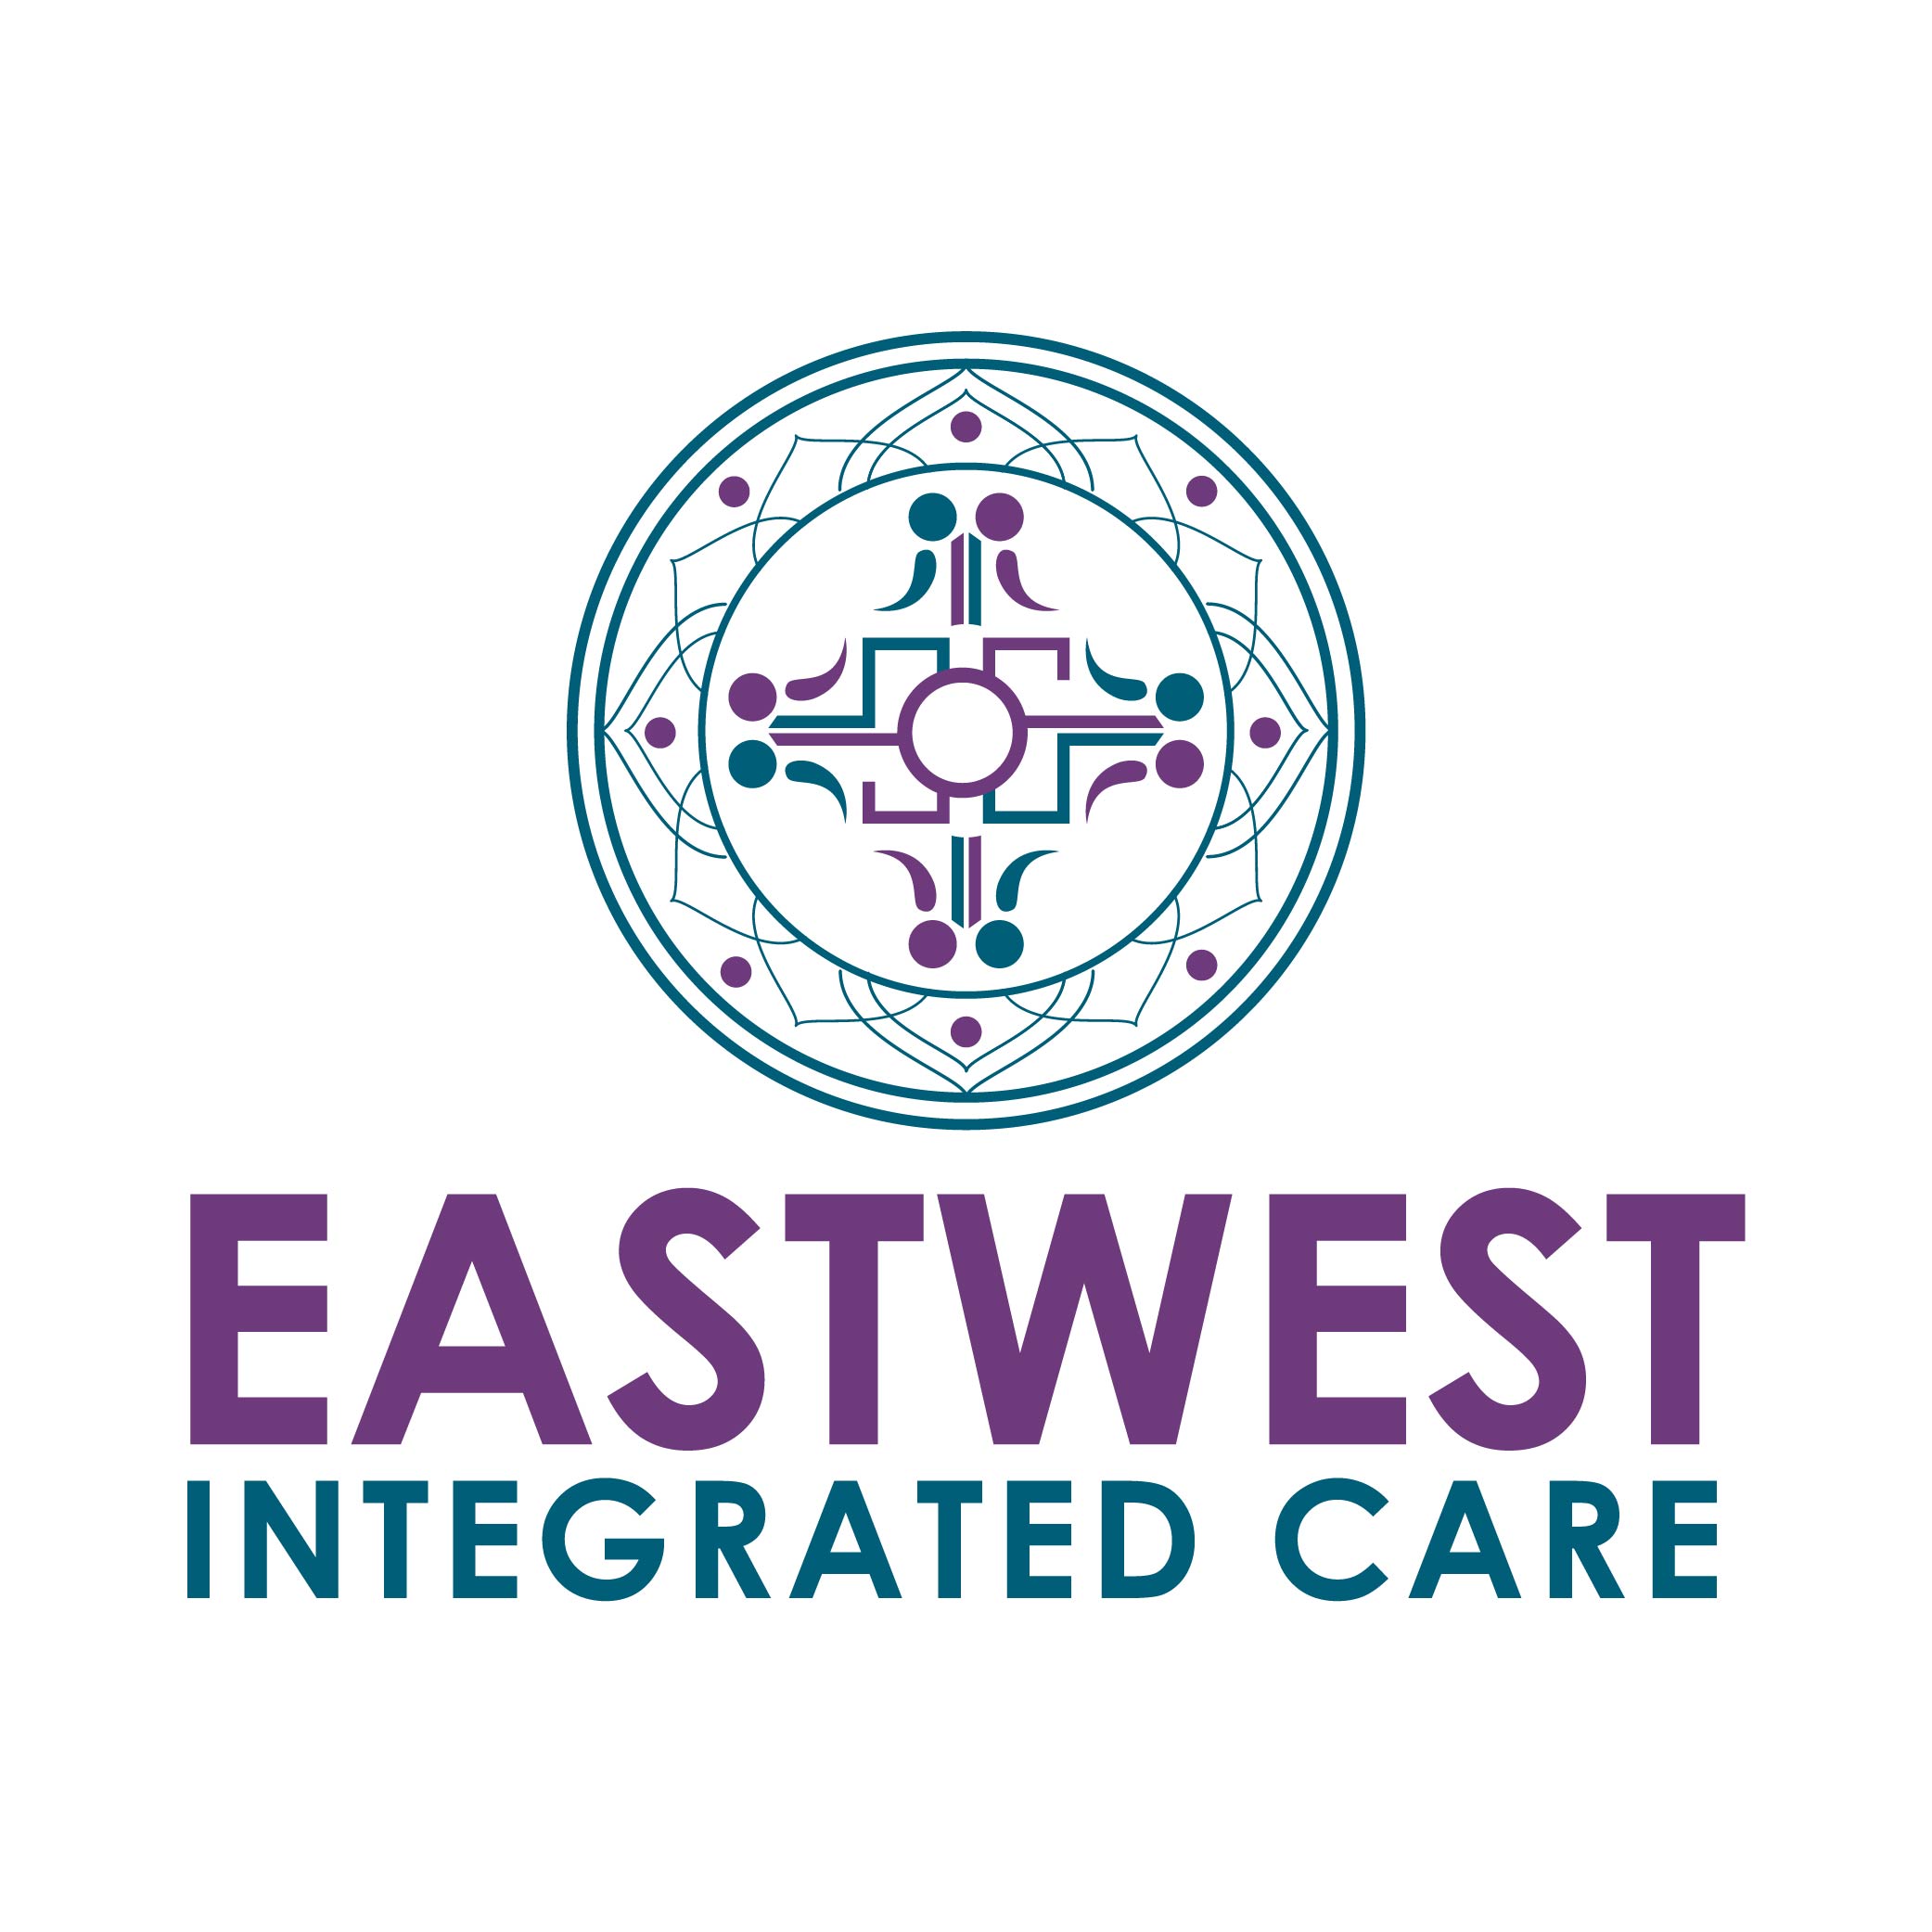 Eastwest Integrated Care